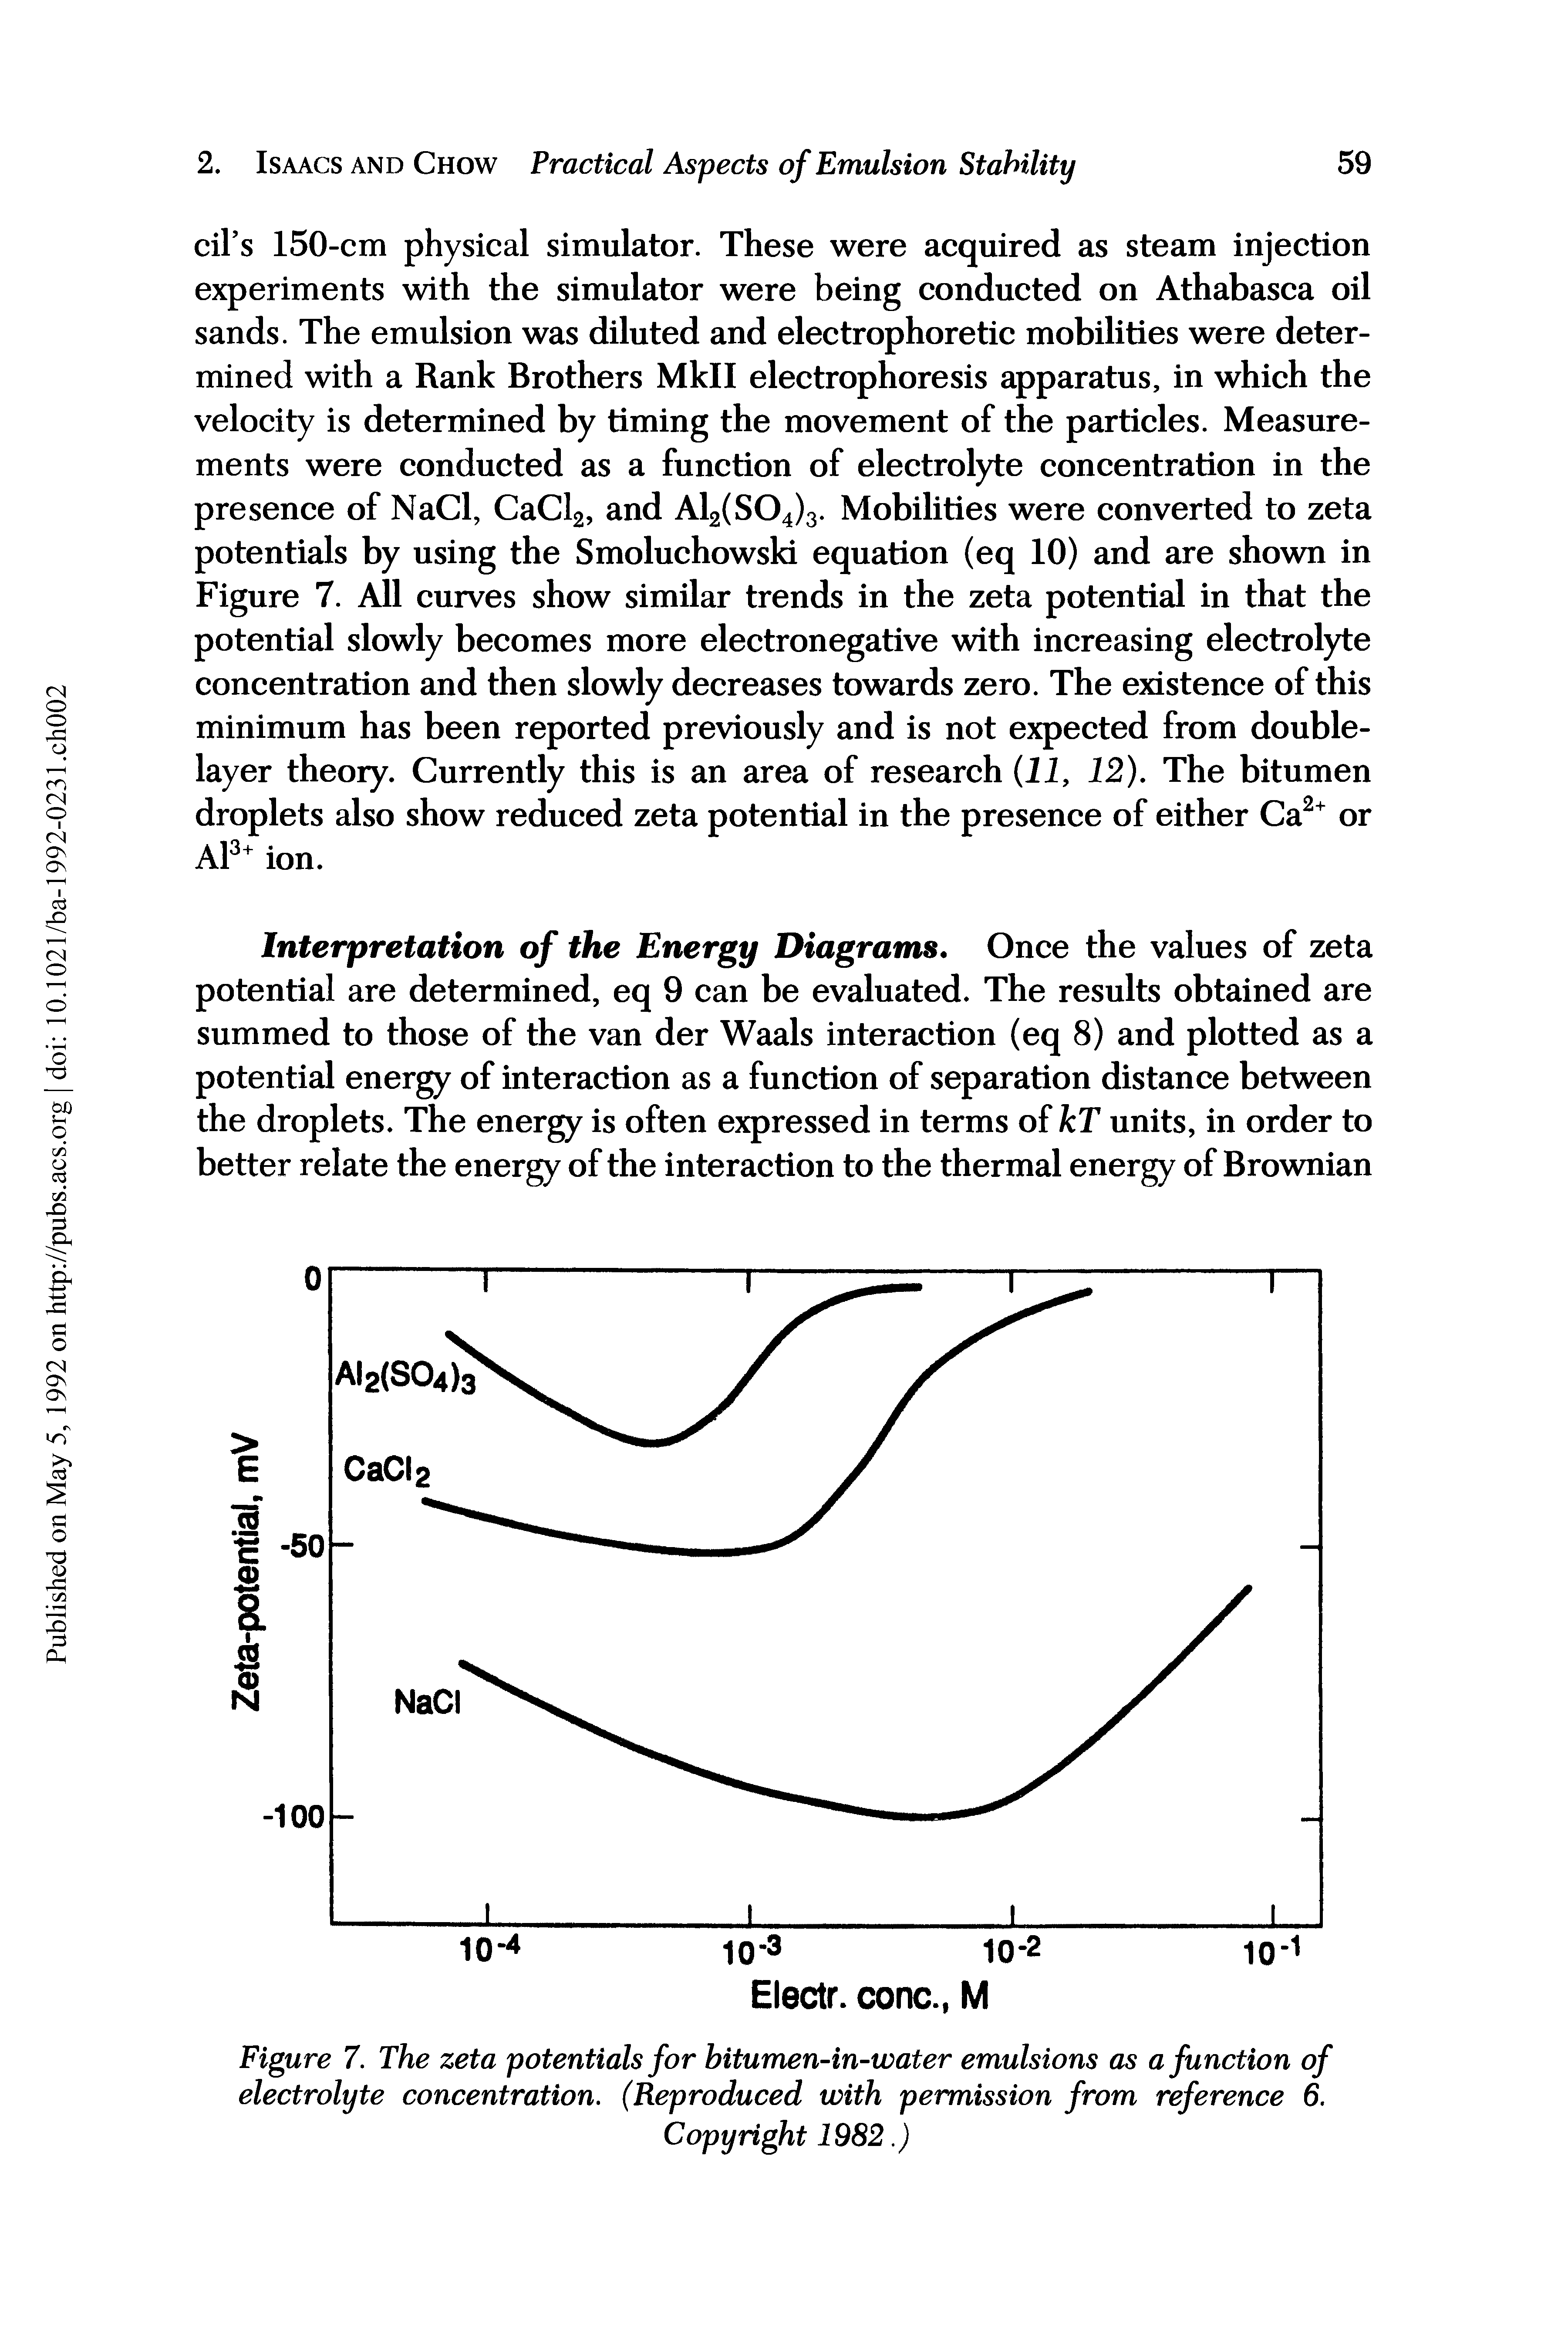 Figure 7. The zeta potentials for bitumen-in-water emulsions as a function of electrolyte concentration. (Reproduced with permission from reference 6.